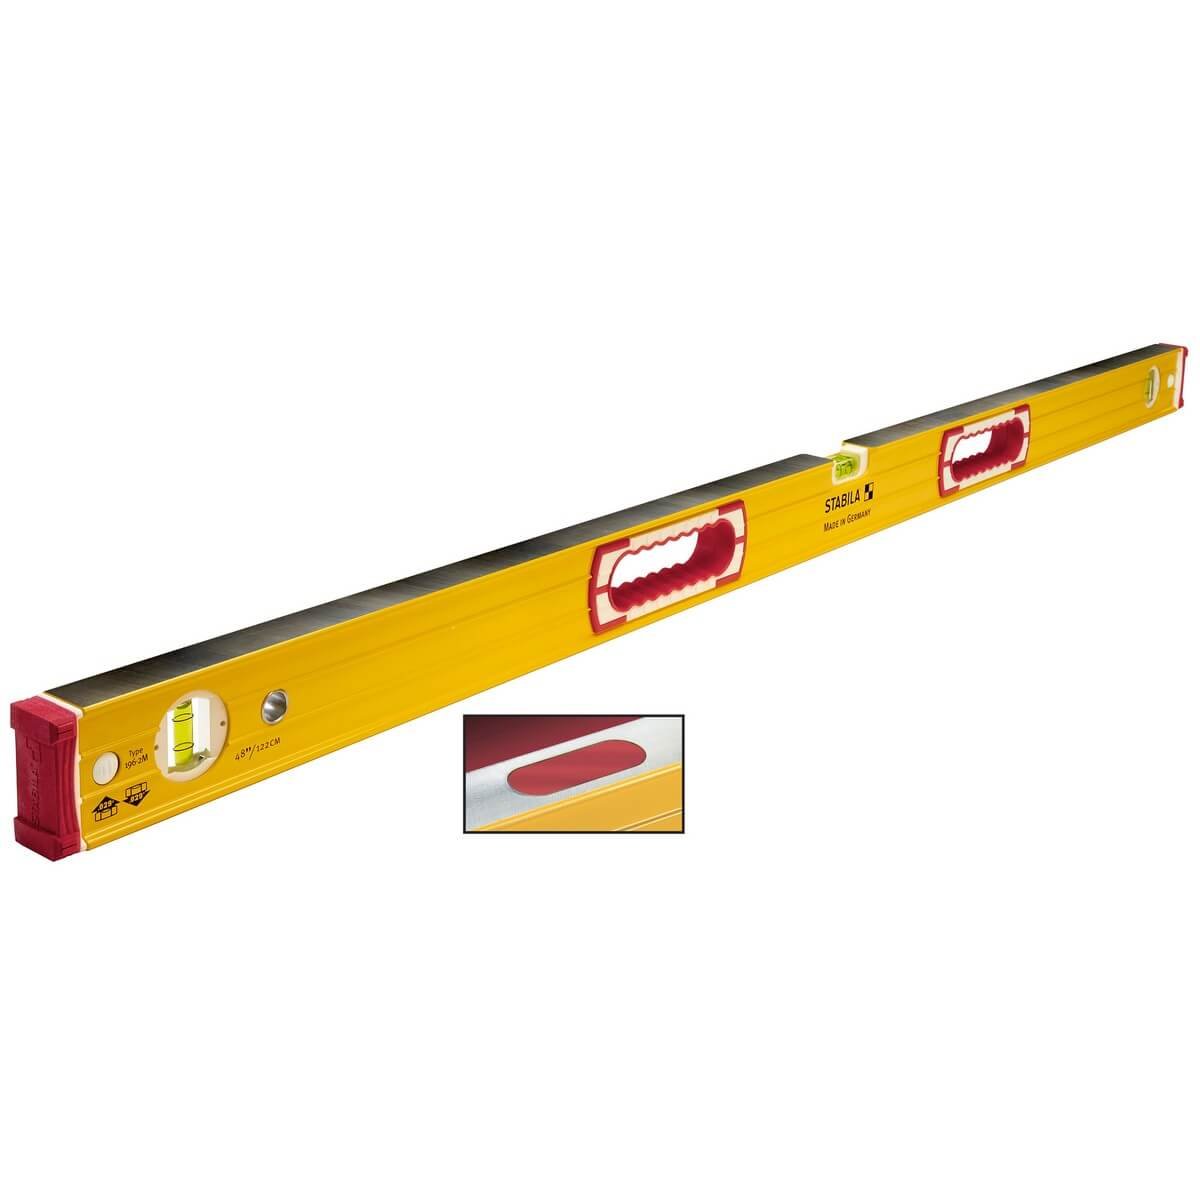 Stabila 38648 - 48" Magnetic Level with Hand Holds